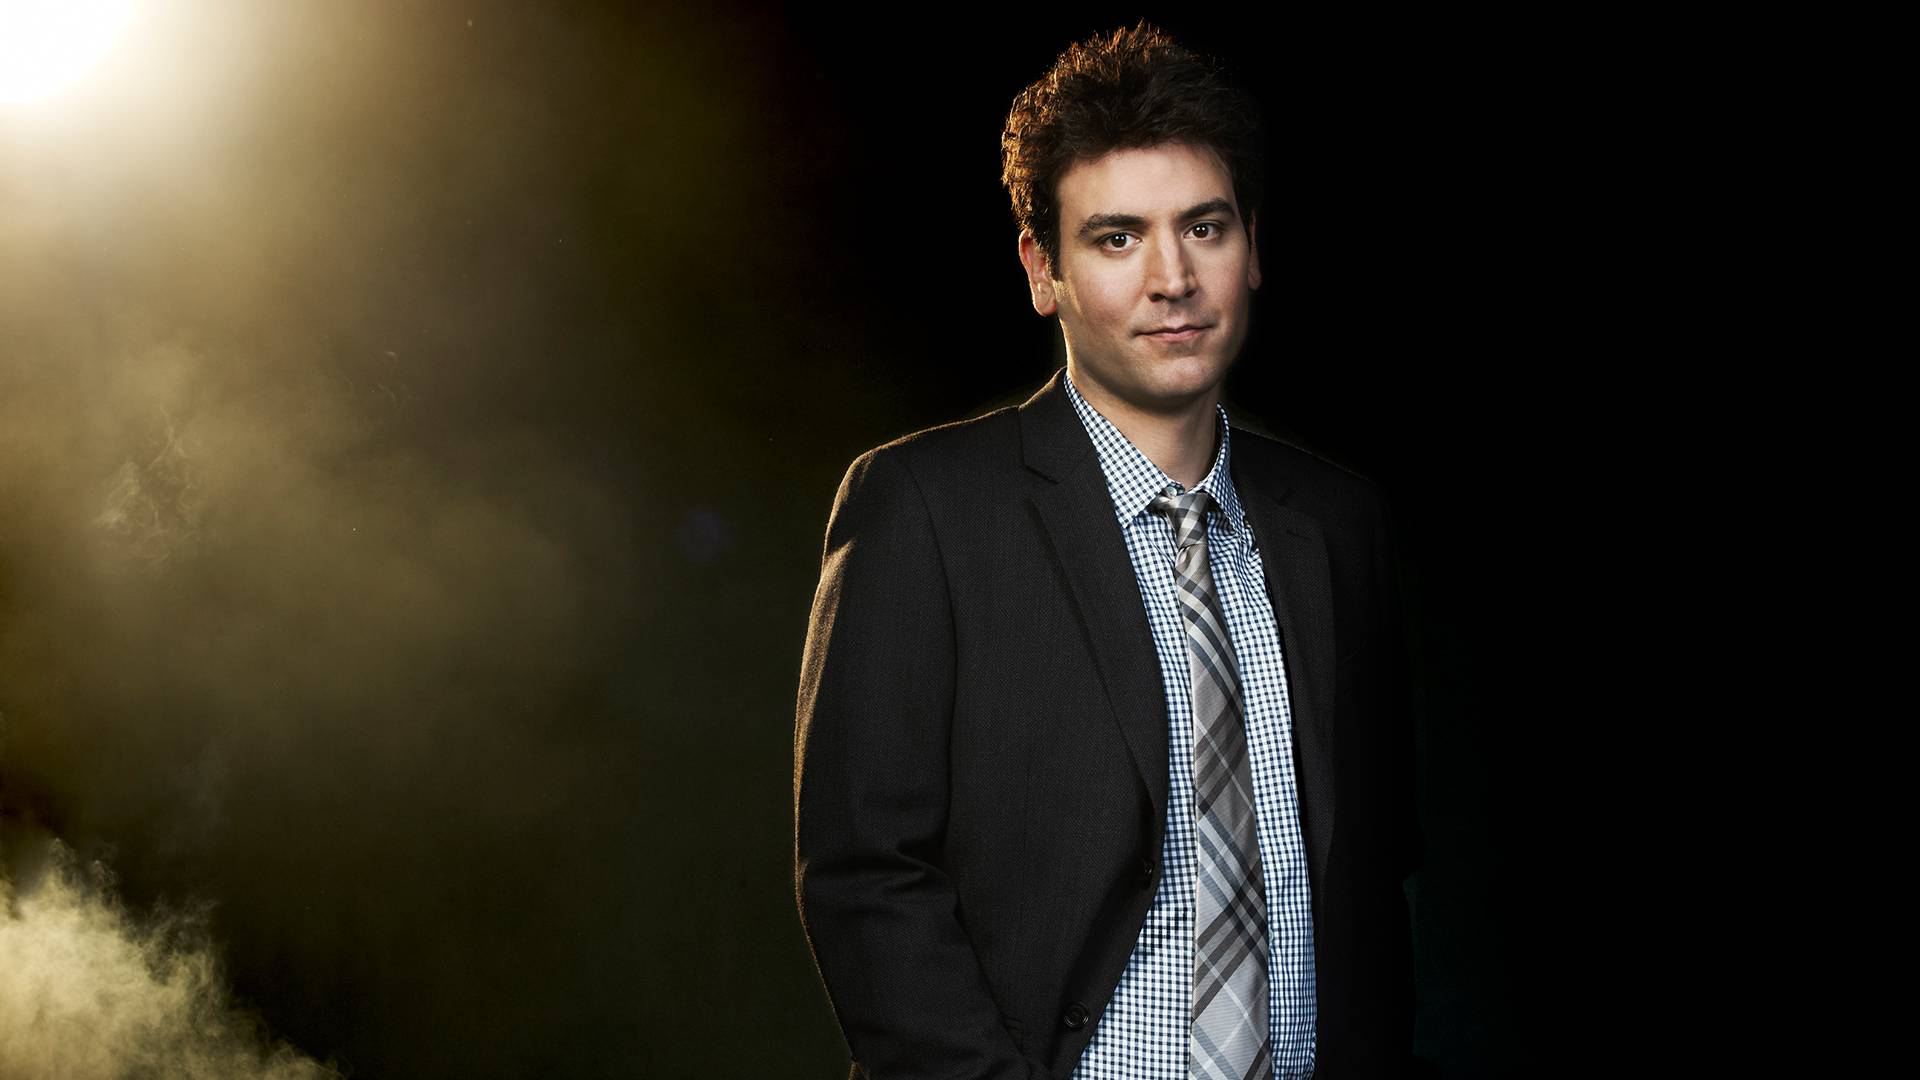 How I Met Your Mother Ted Mosby Josh Radnor 1920x1080